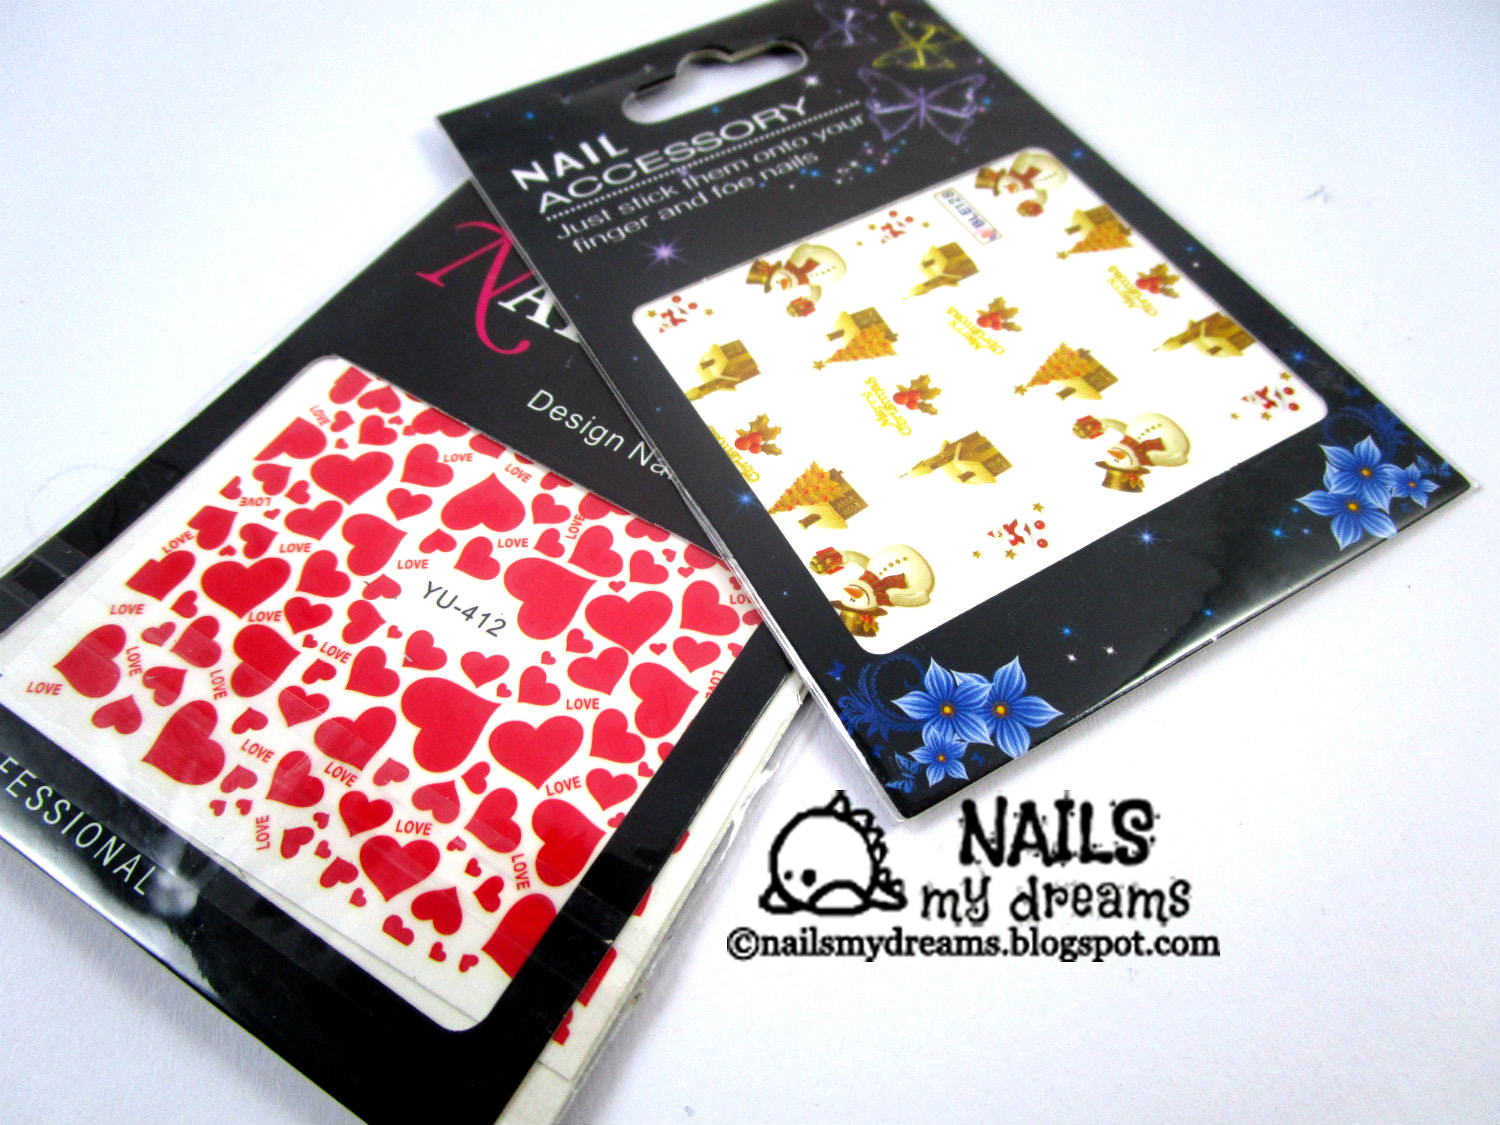 1. Nail Art Window Decals by Born Pretty - wide 8